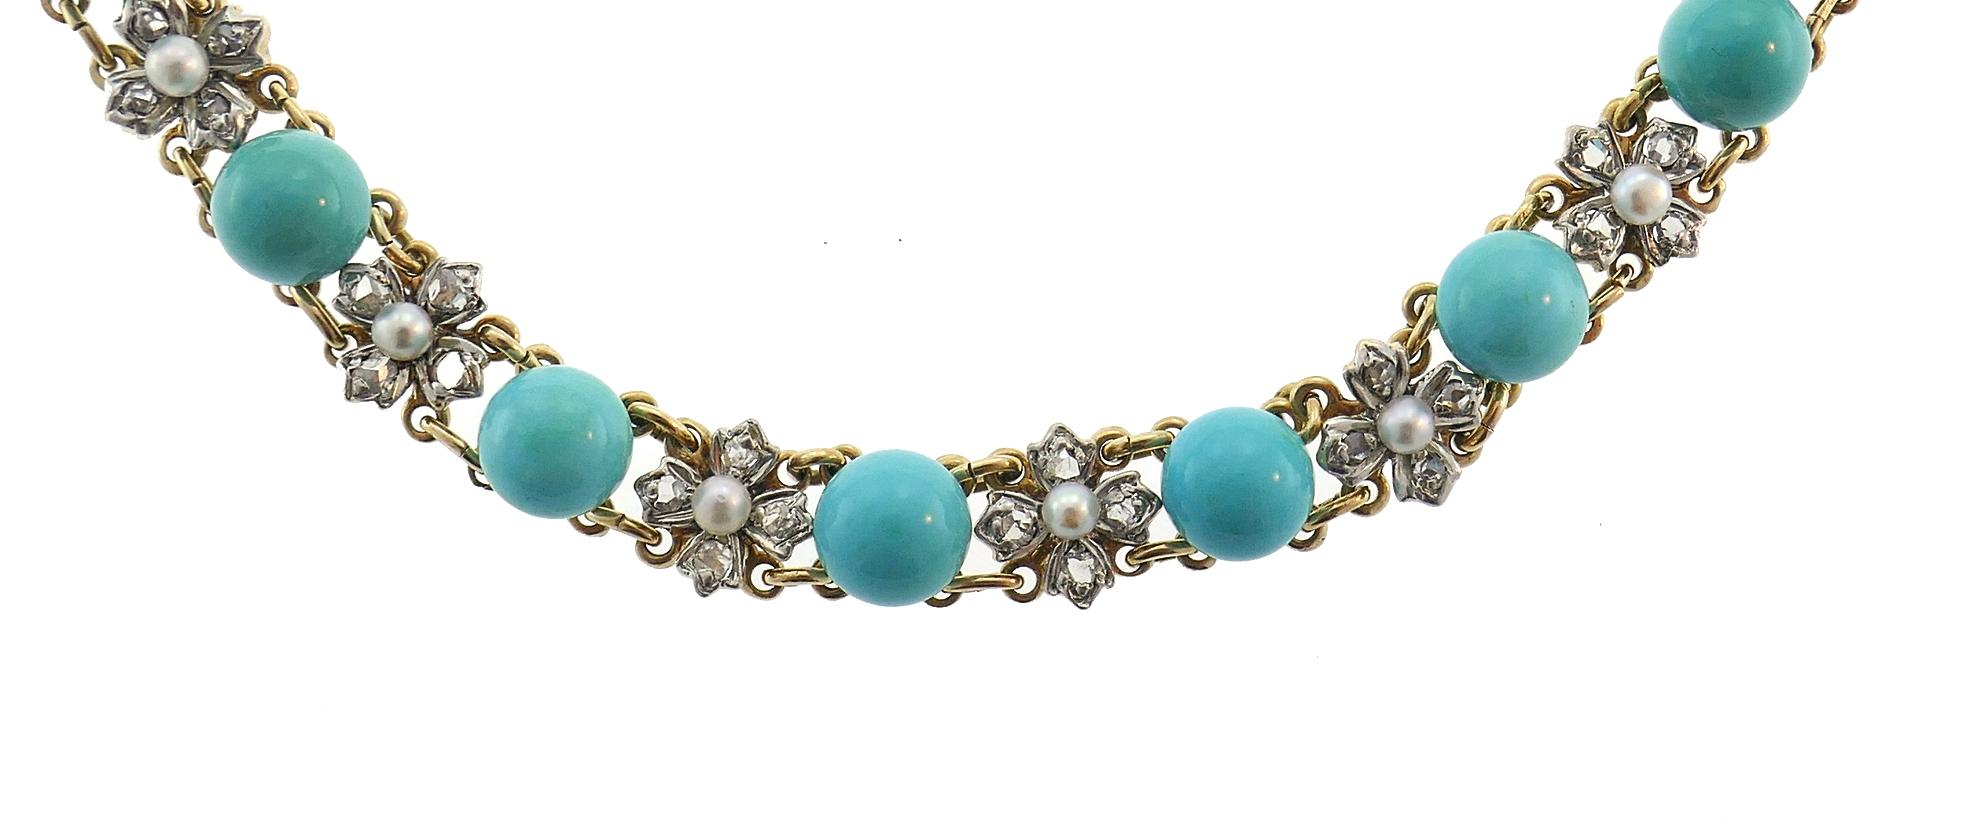 Mixed Cut Victorian Turquoise 14k Gold Necklace